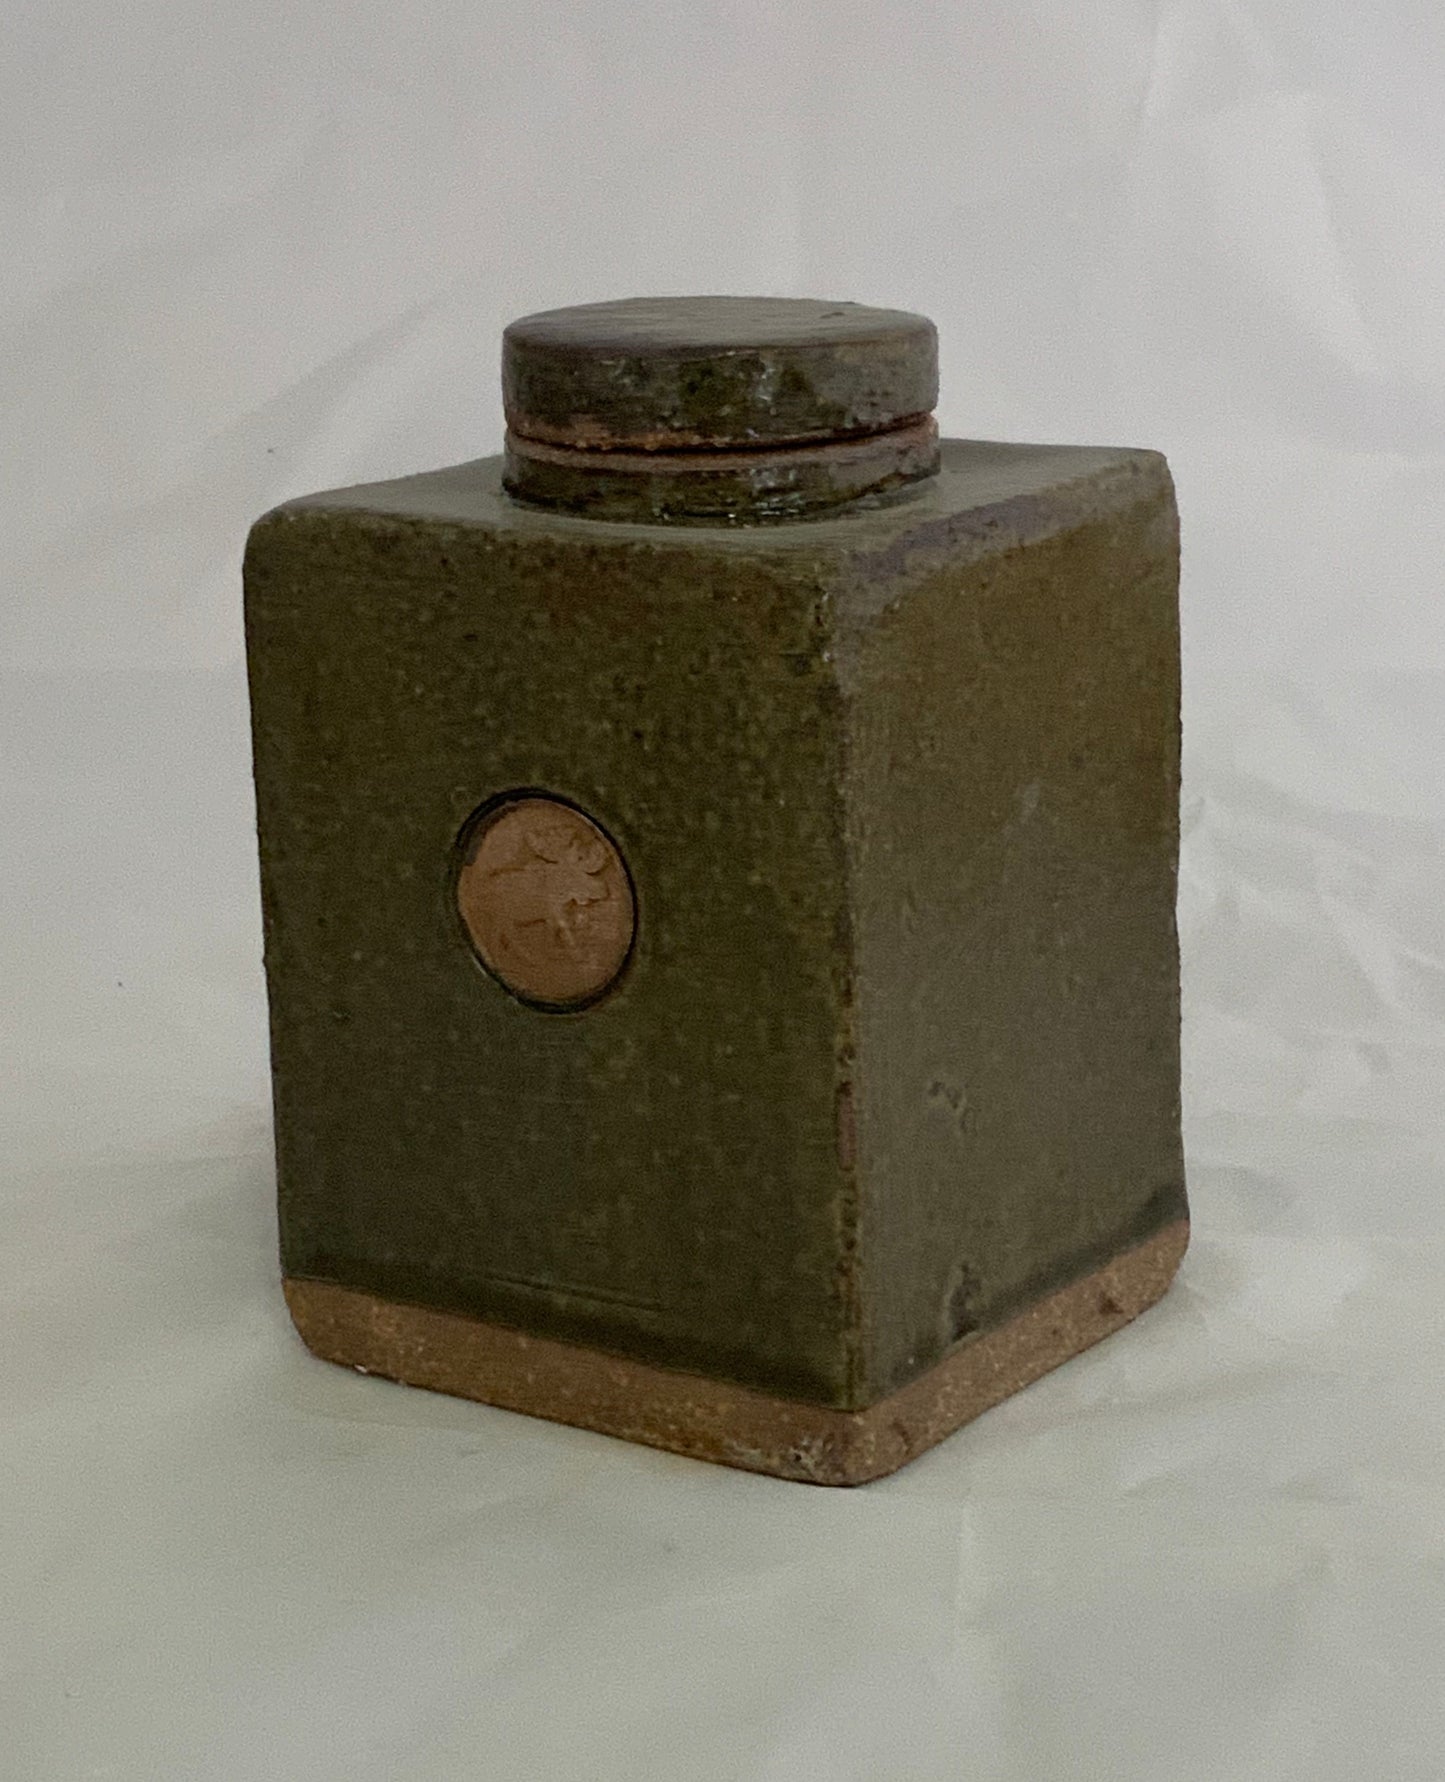 Small Ceramic Green w/Moose Stamp Stoneware Jar Muffy Moore: Ceramic Potter Green w/Moose Stamp Jar 3" long x 3" wide x 4.5"  high  "Moss Green" glaze   Stoneware Square Jar  Round stamp on the front